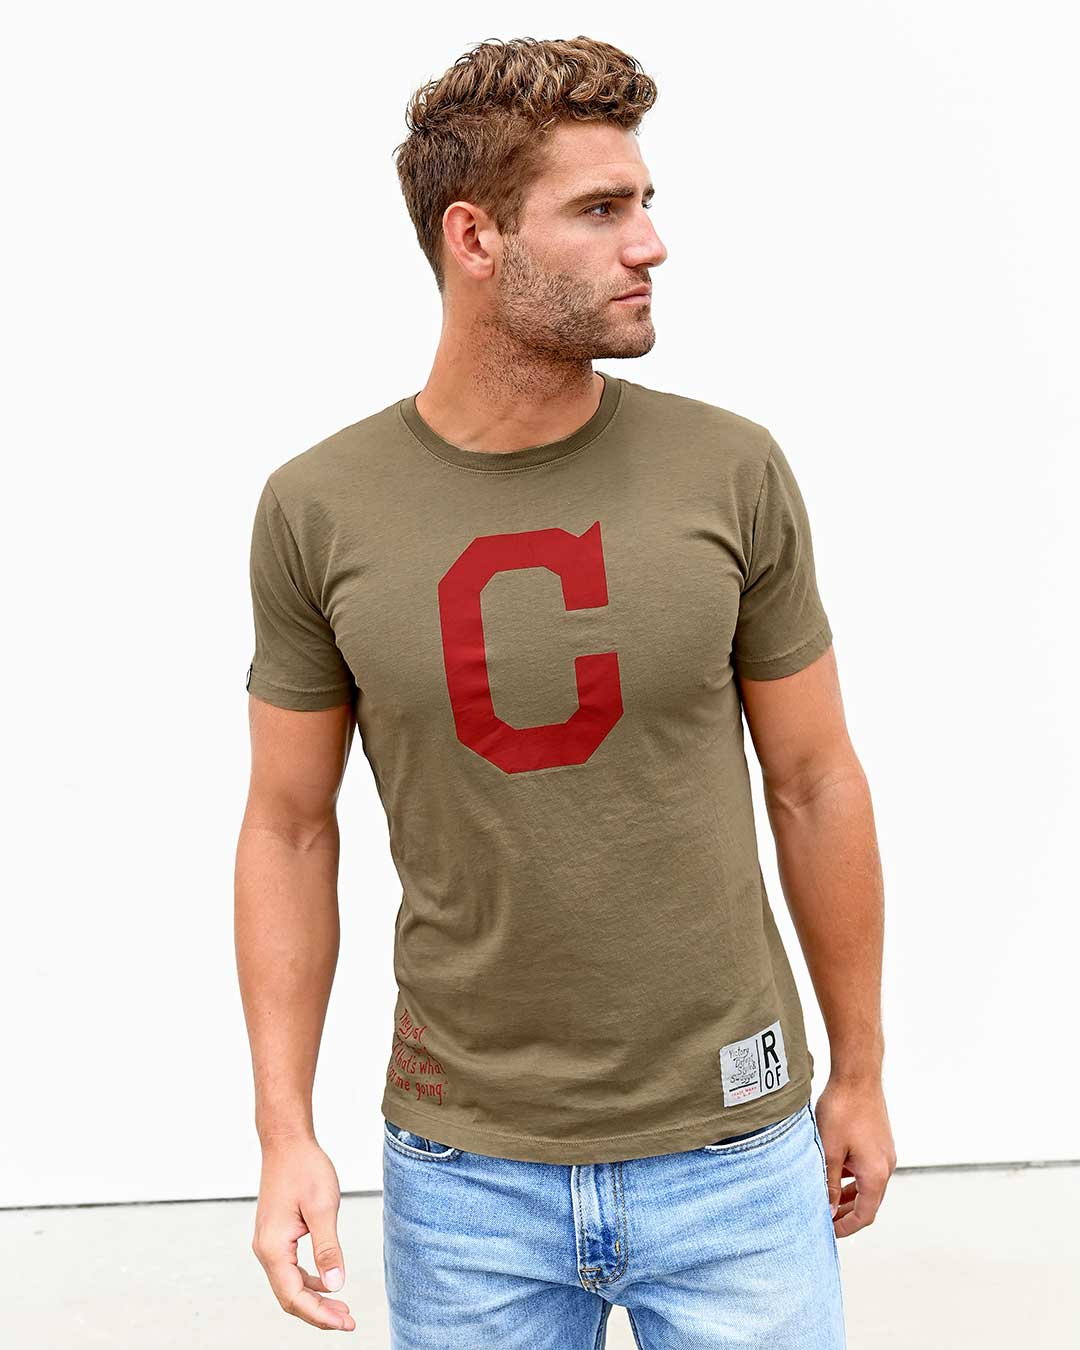 Jim Thorpe # 21 Olive Tee - Roots of Fight Canada